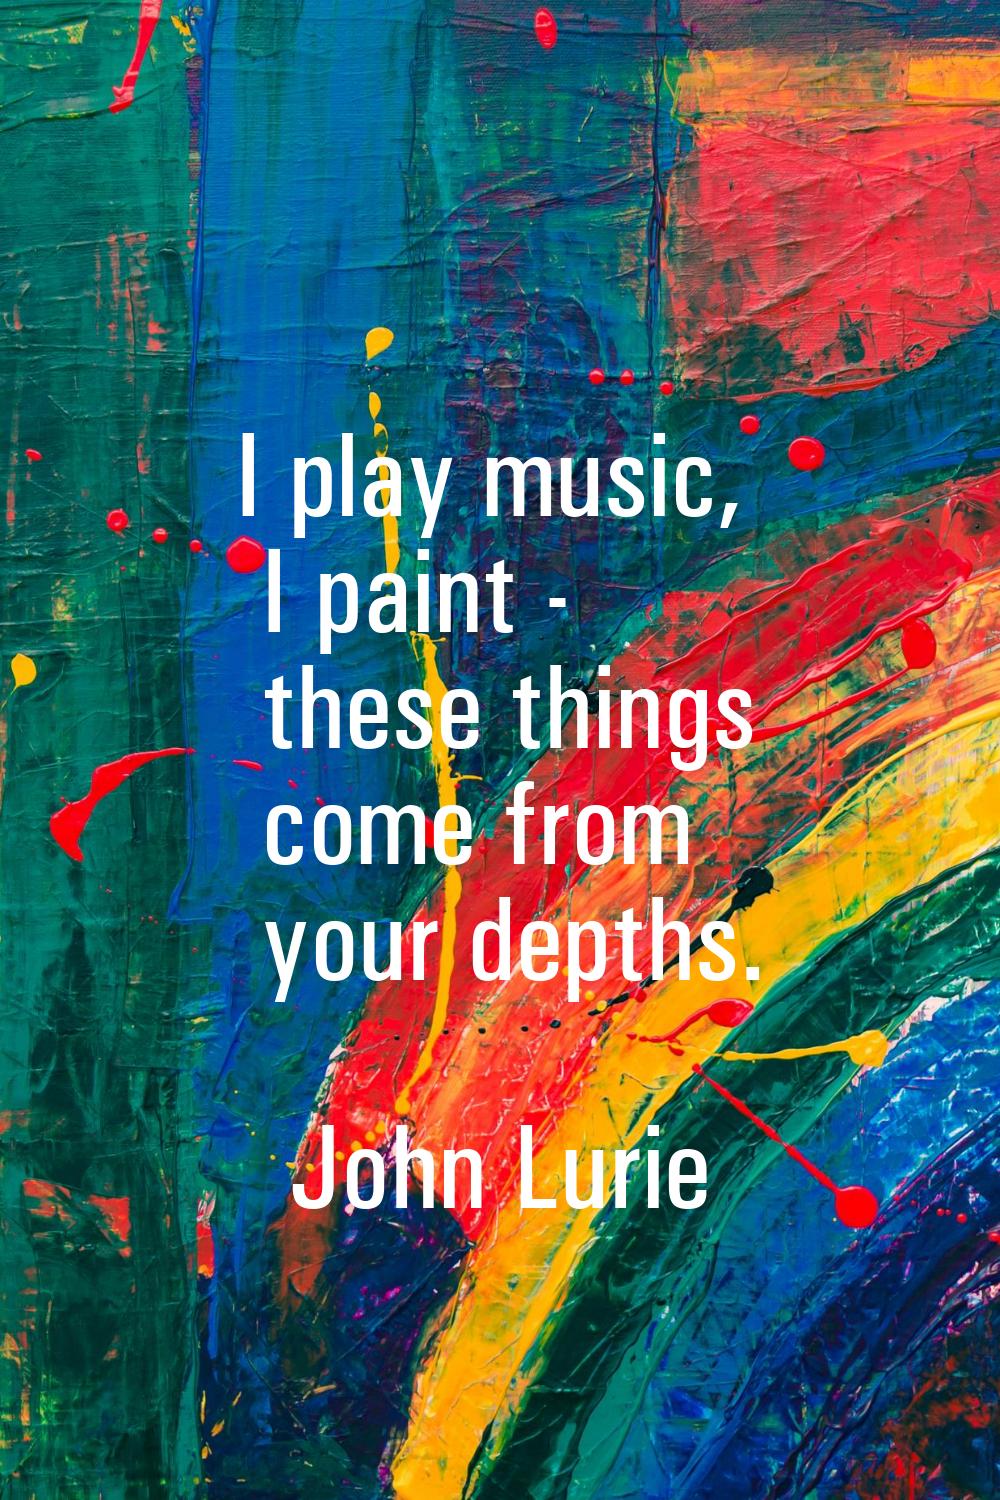 I play music, I paint - these things come from your depths.